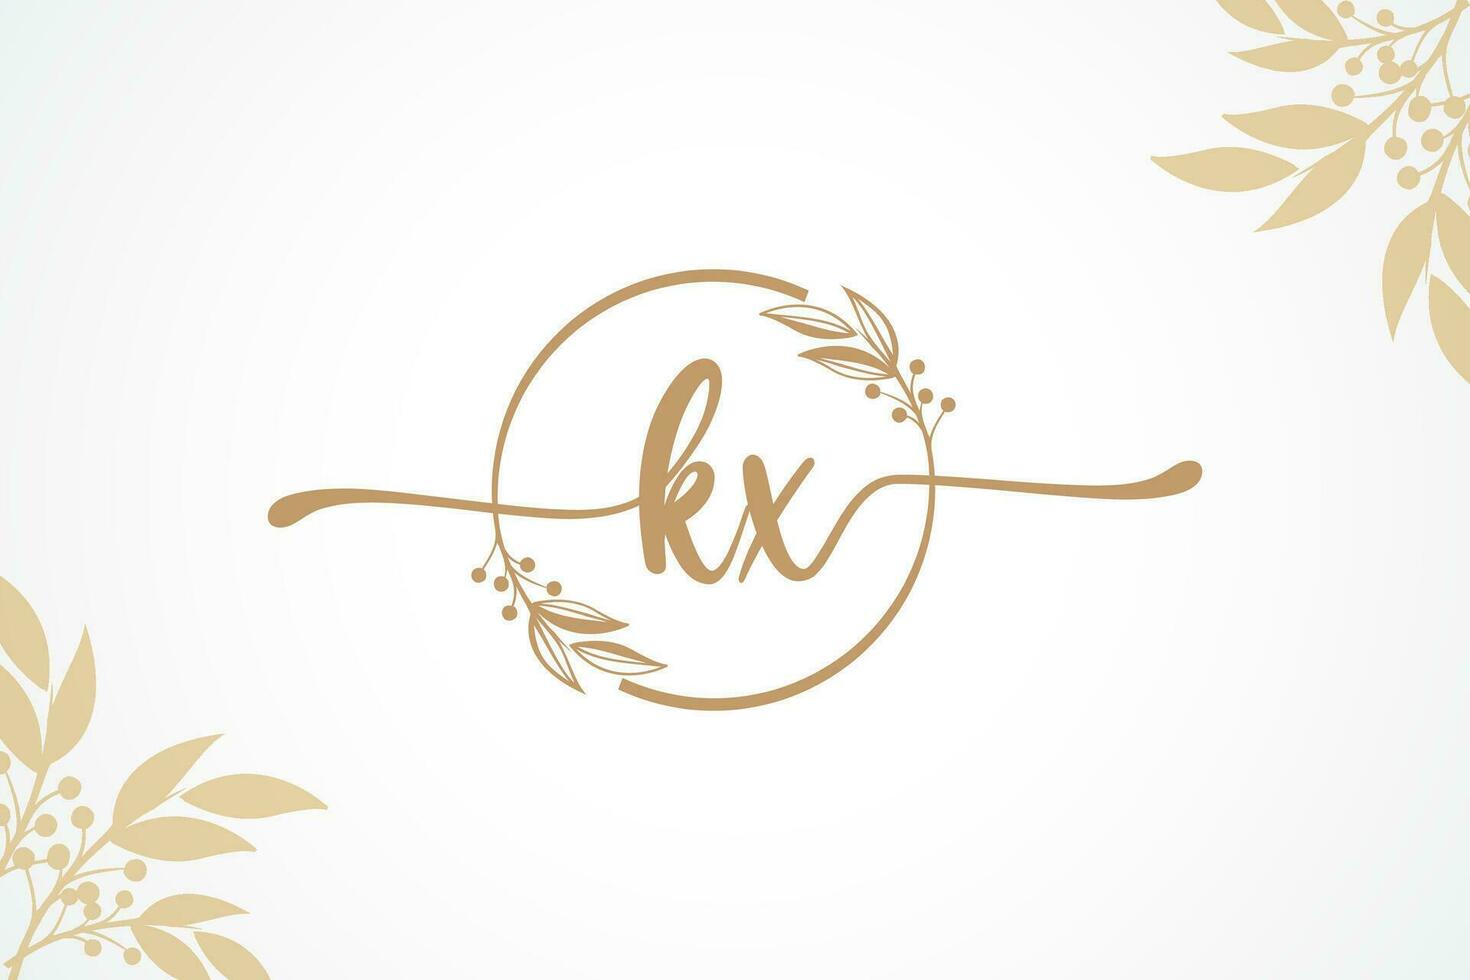 luxury gold signature initial kx logo design isolated leaf and flower vector